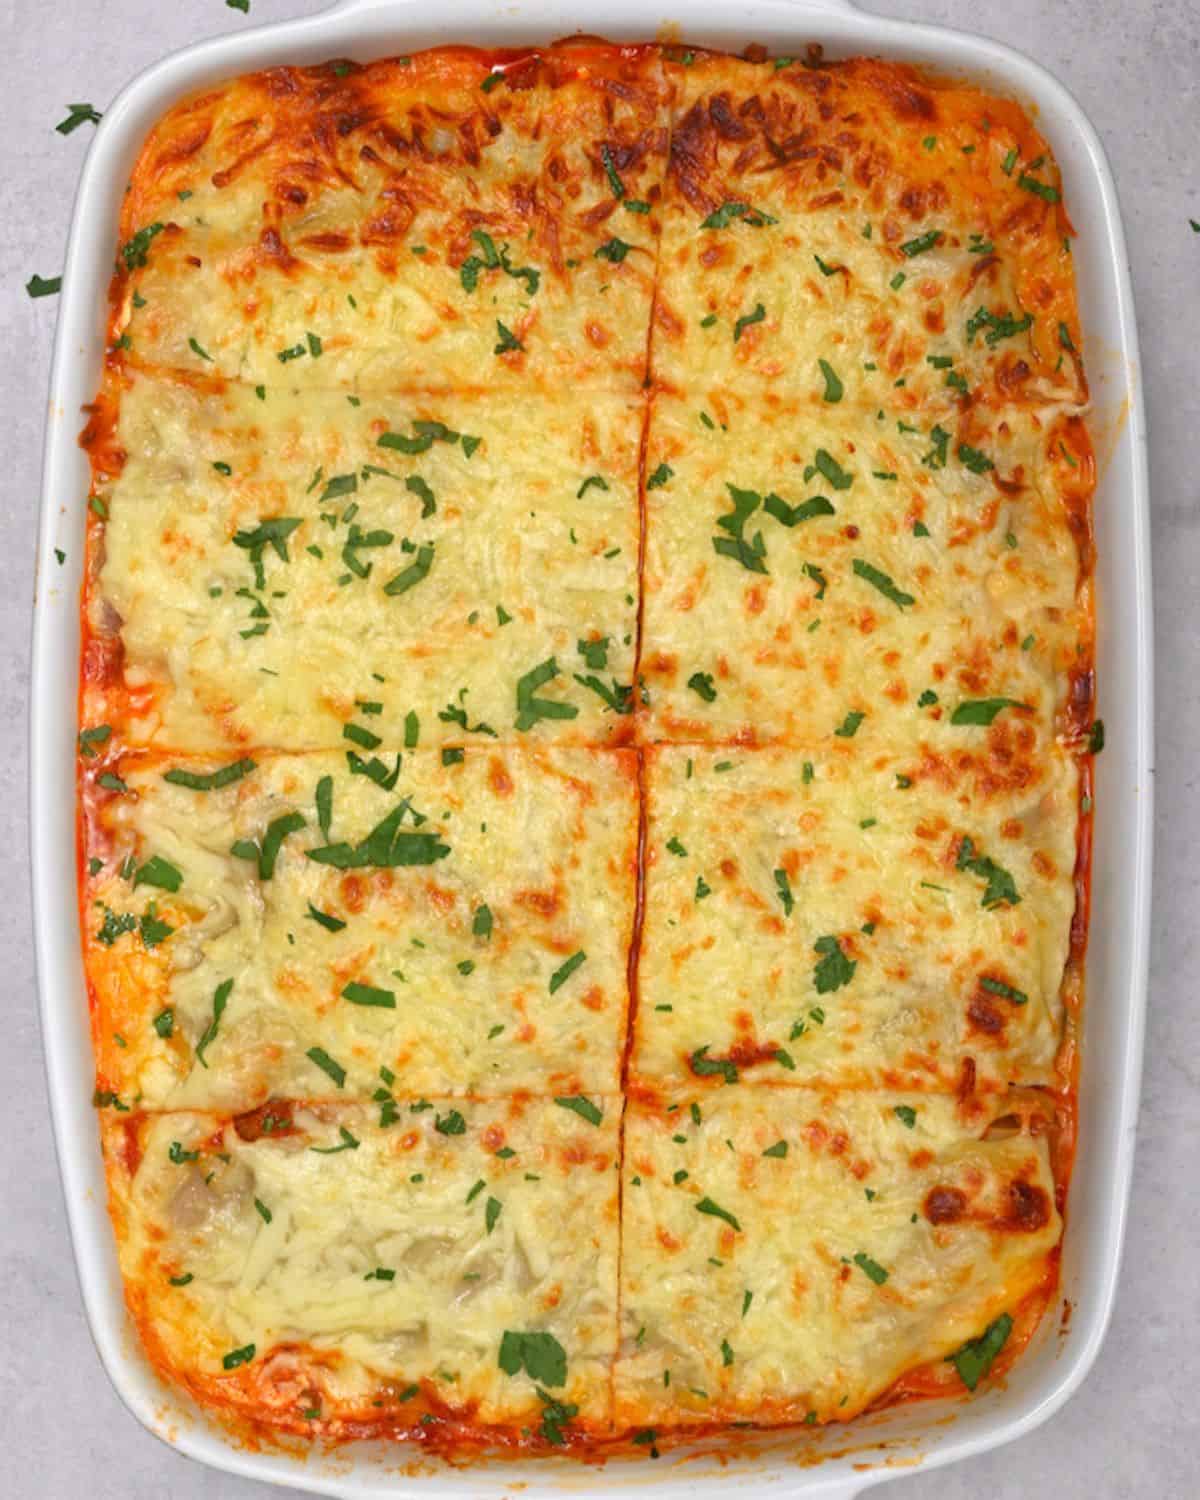 Home-baked beef lasagna in a baking dish